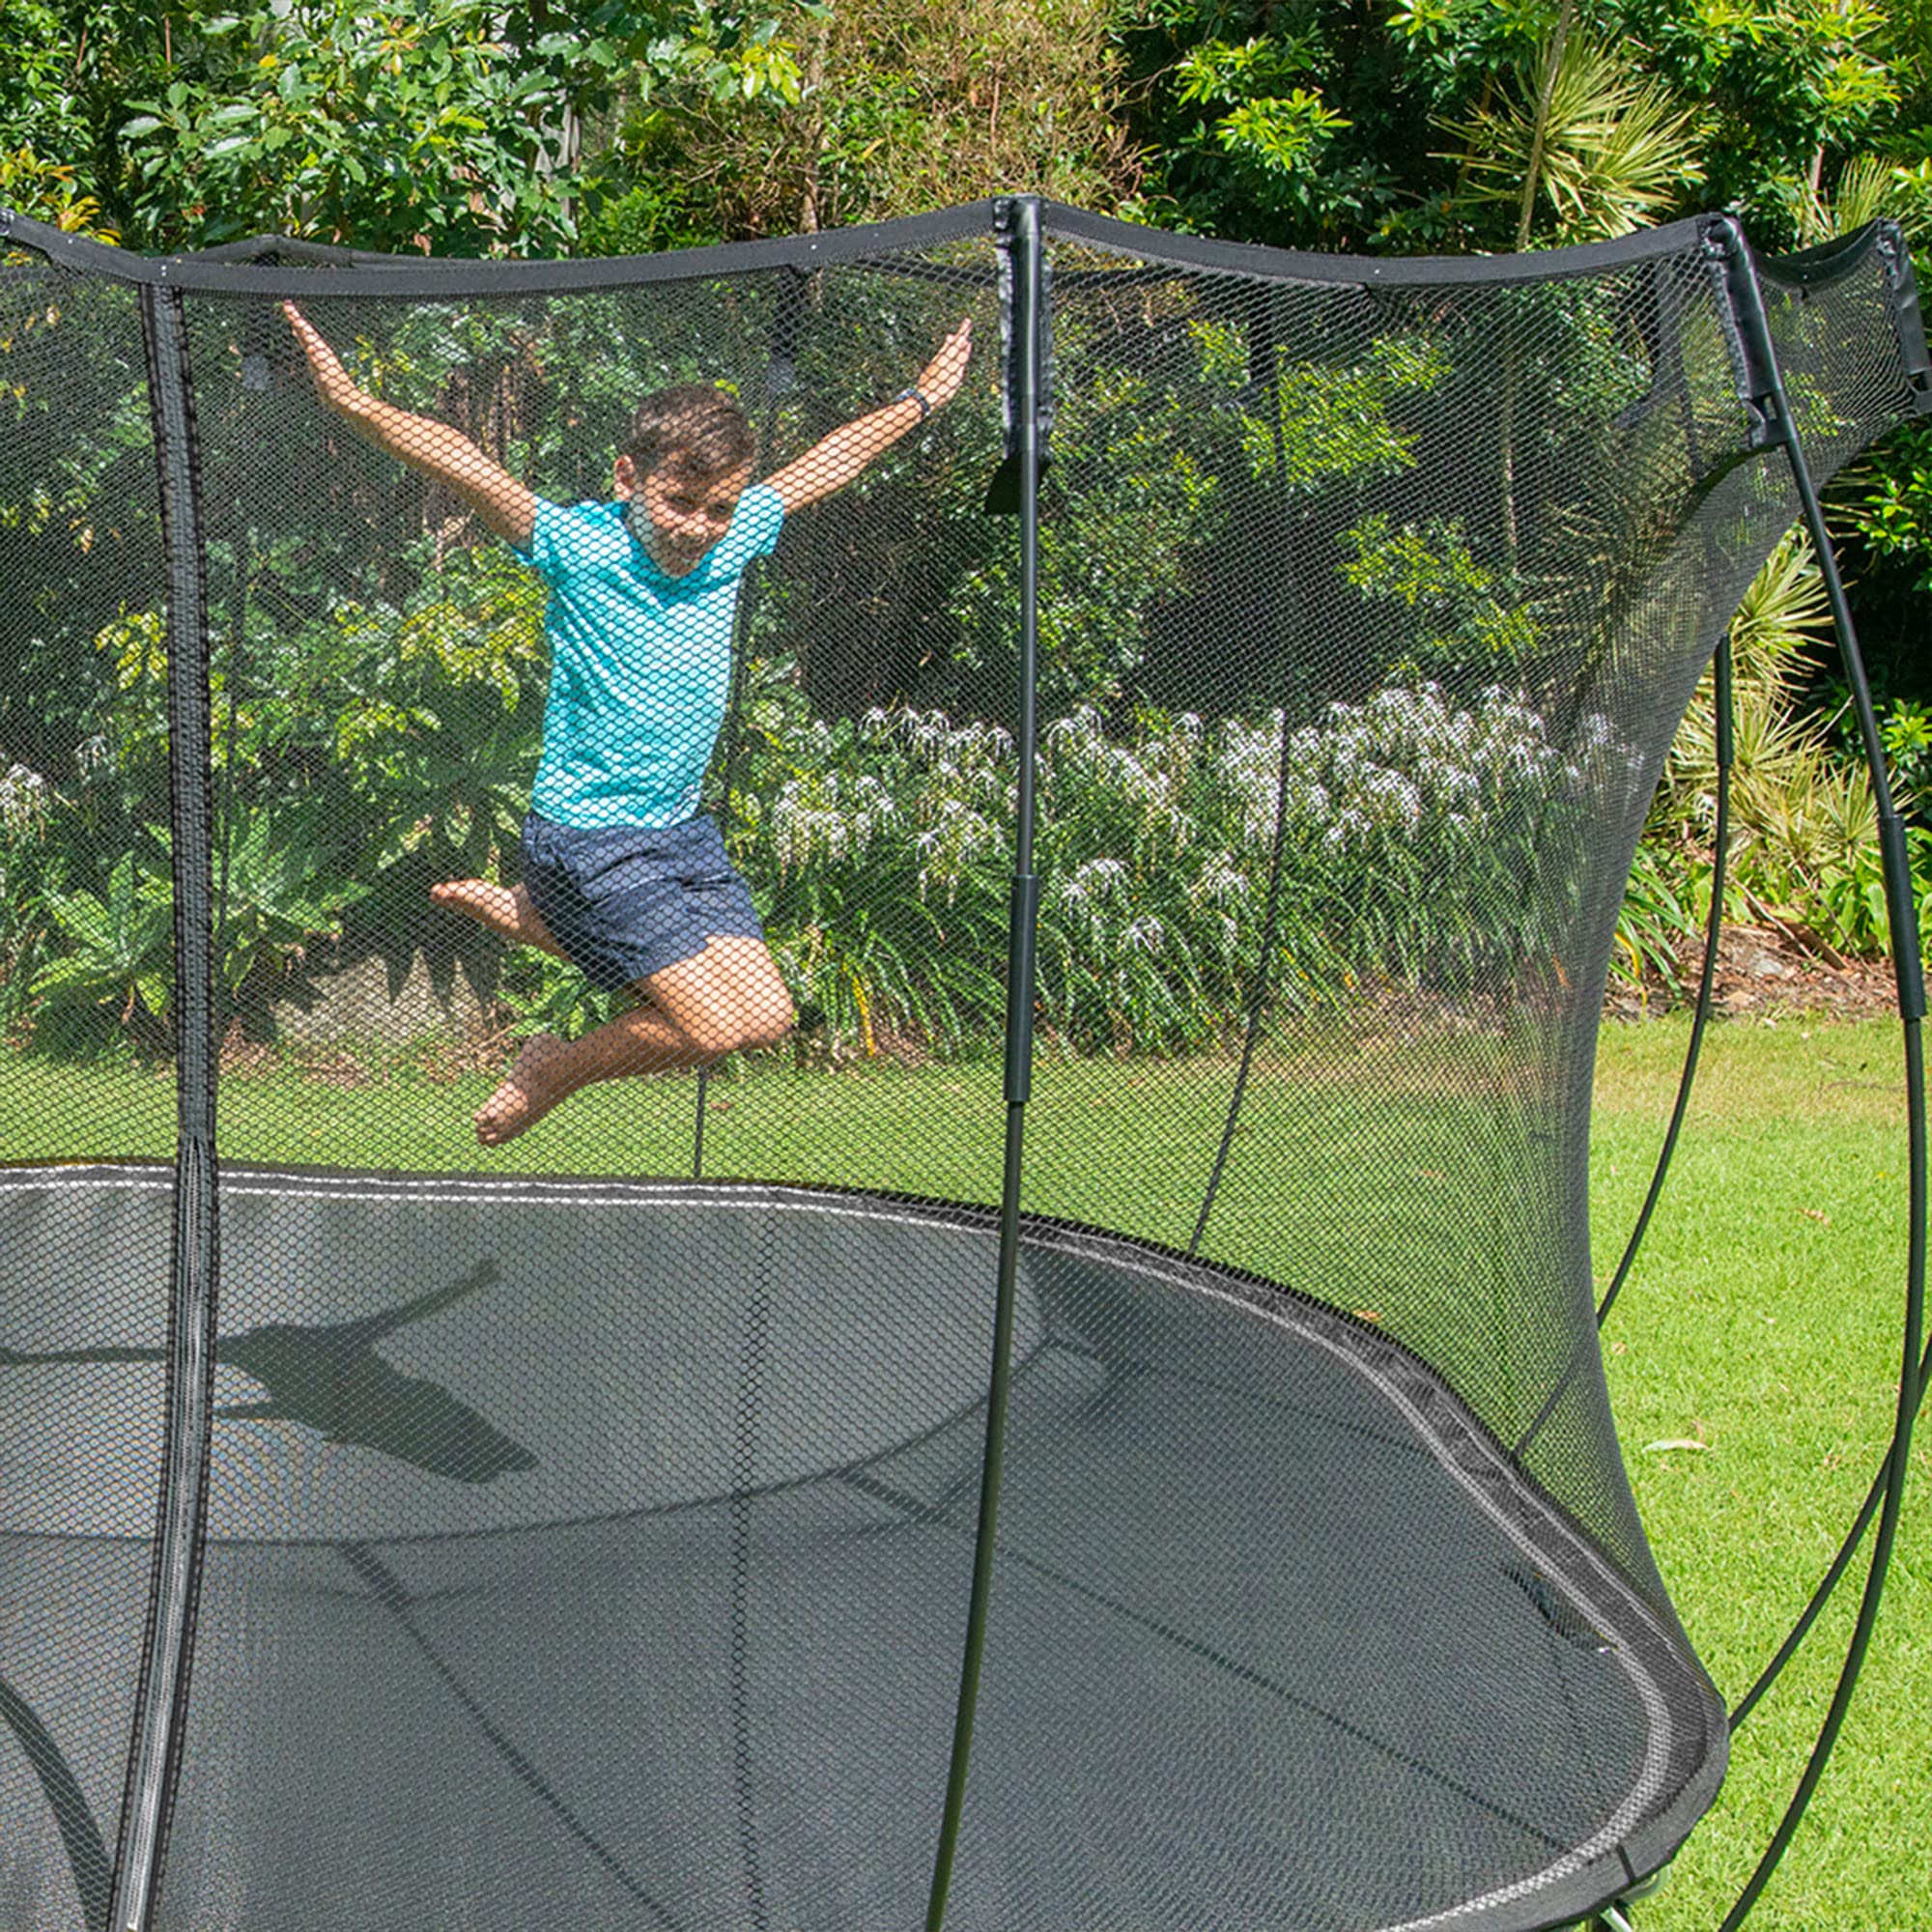 Springfree Trampoline Outdoor 11 x 11 Foot Large Square Trampoline with FlexiNet Safety Enclosure and SoftEdge Jump Bounce Mat Outdoor Play Equipment